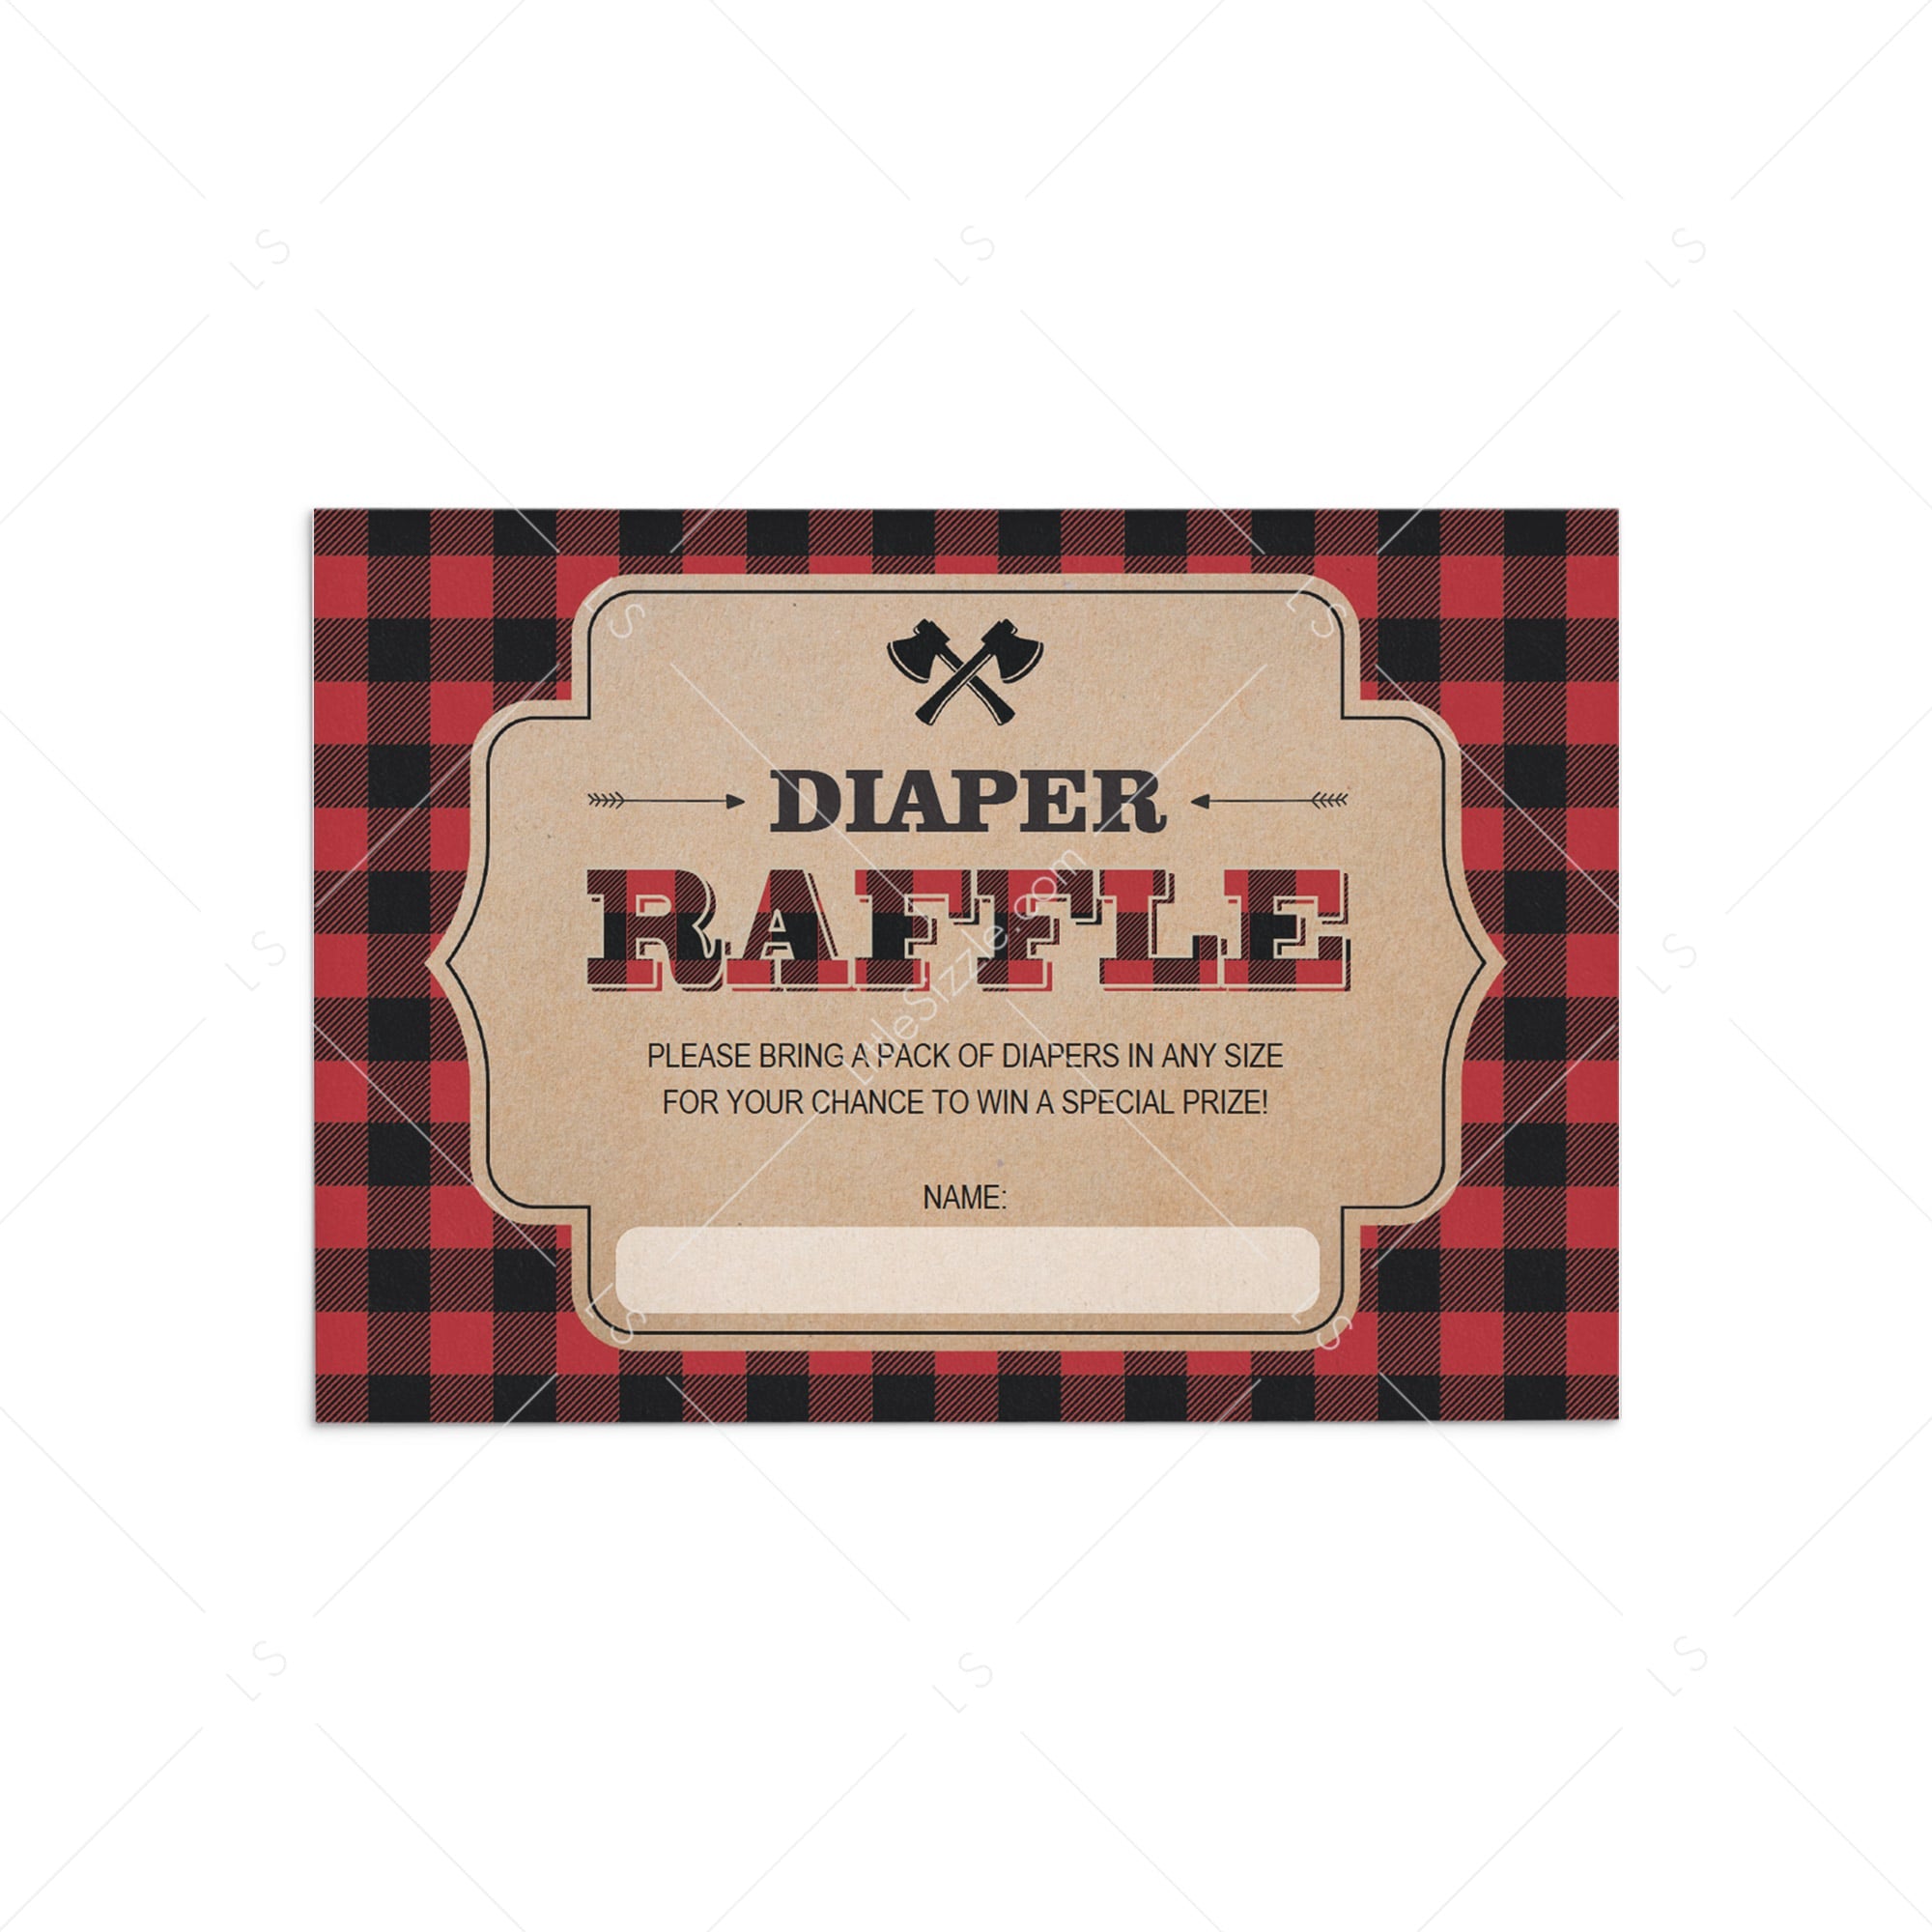 Rustic Baby Raffle Cards for a Lumberjack Themed Baby Shower